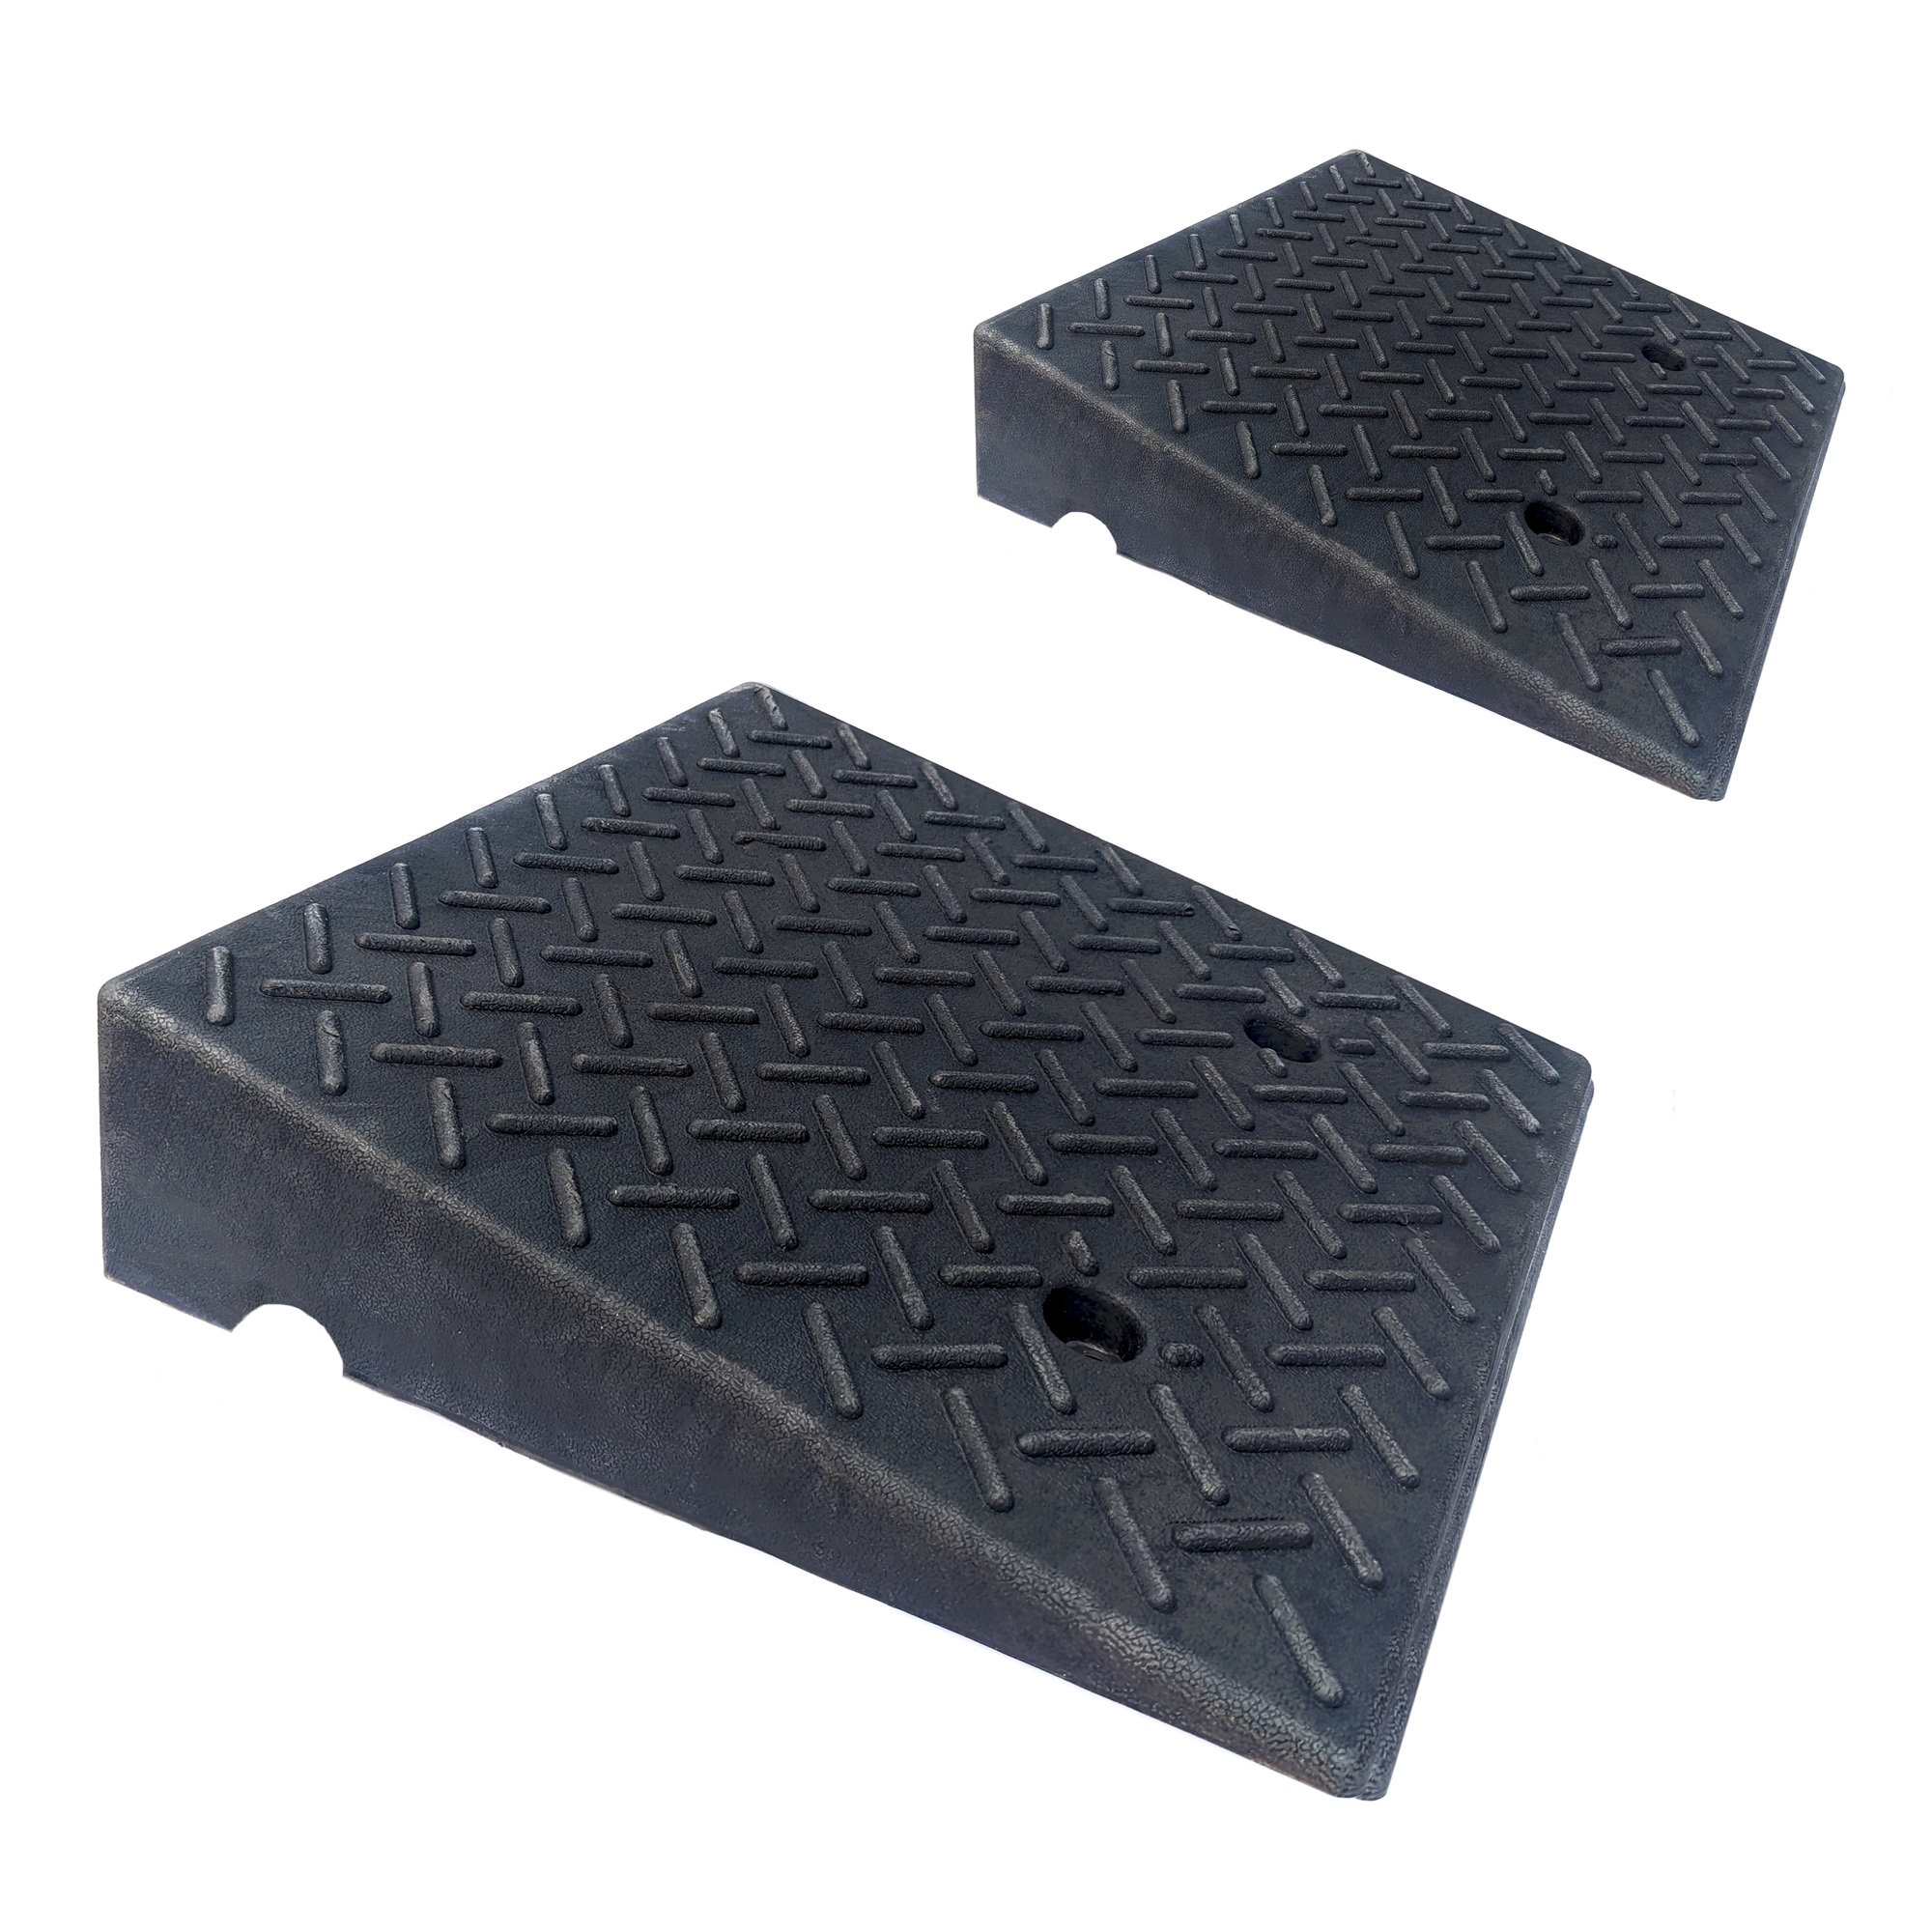 Light Duty Rubber Ramps For Shipping Containers/Sea Cans (2 Pack)